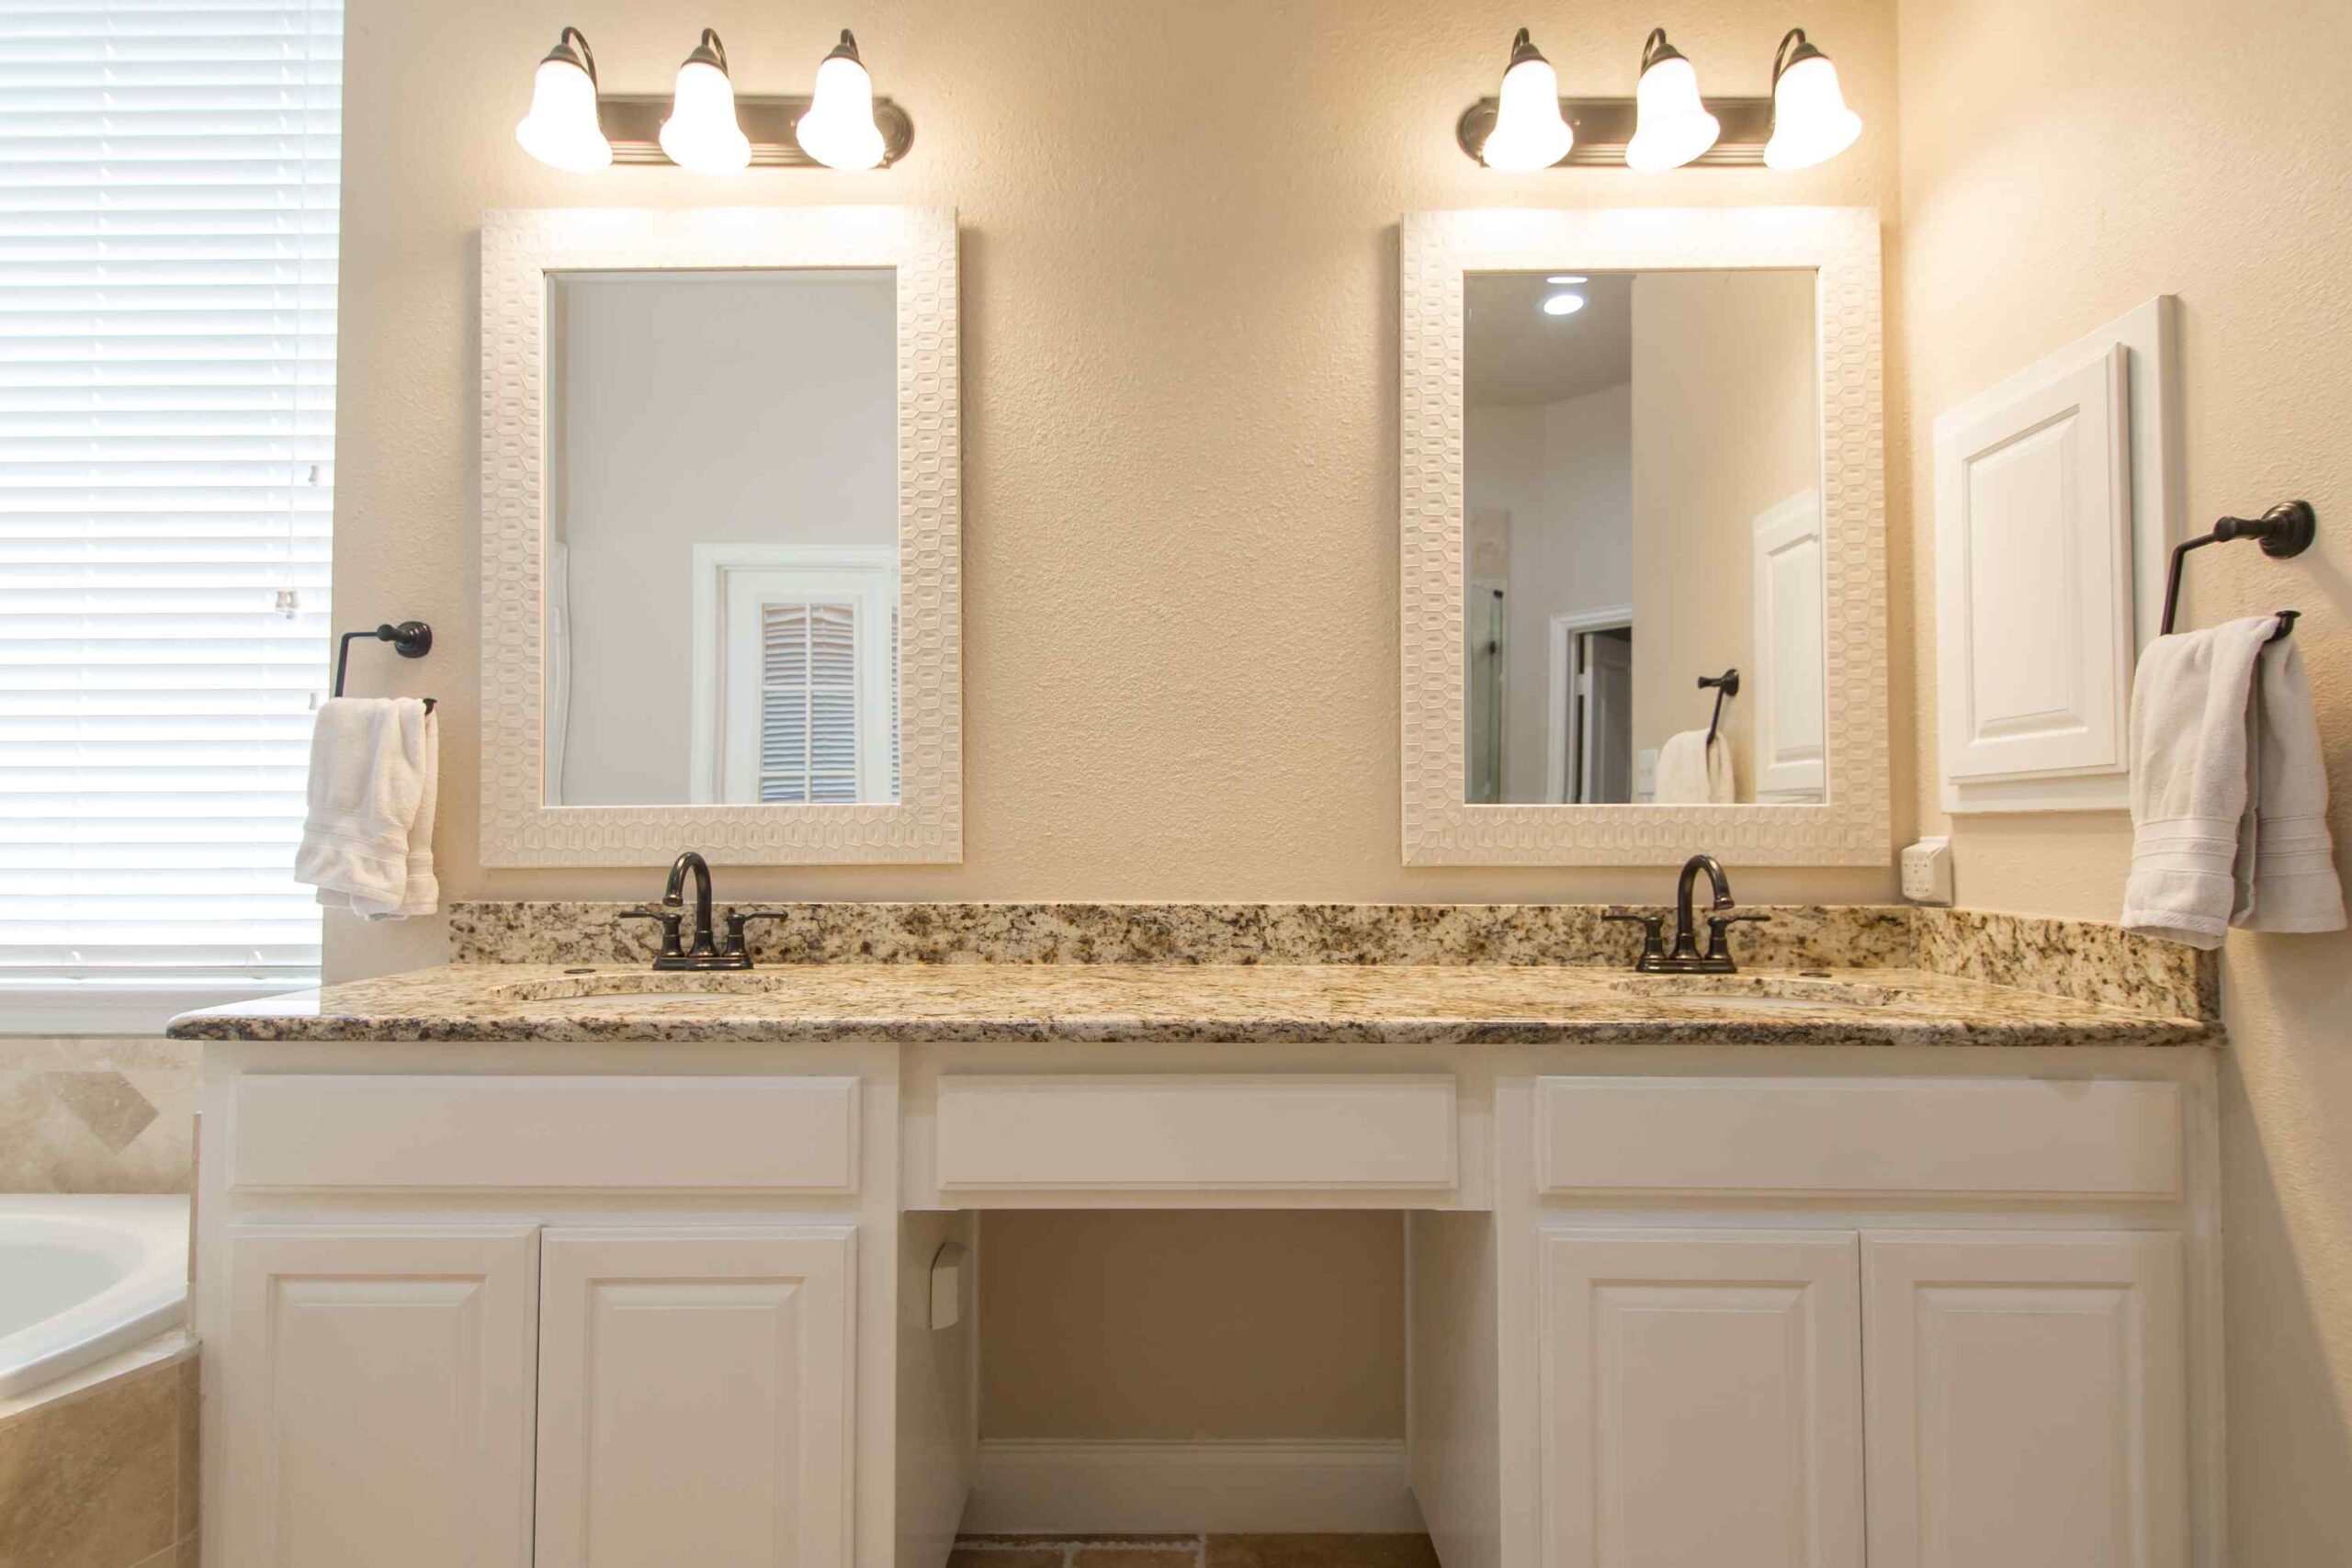 Modern Blu bathrooms double vanity - Also provides Modern Home Remodeling service in Flower Mound TX